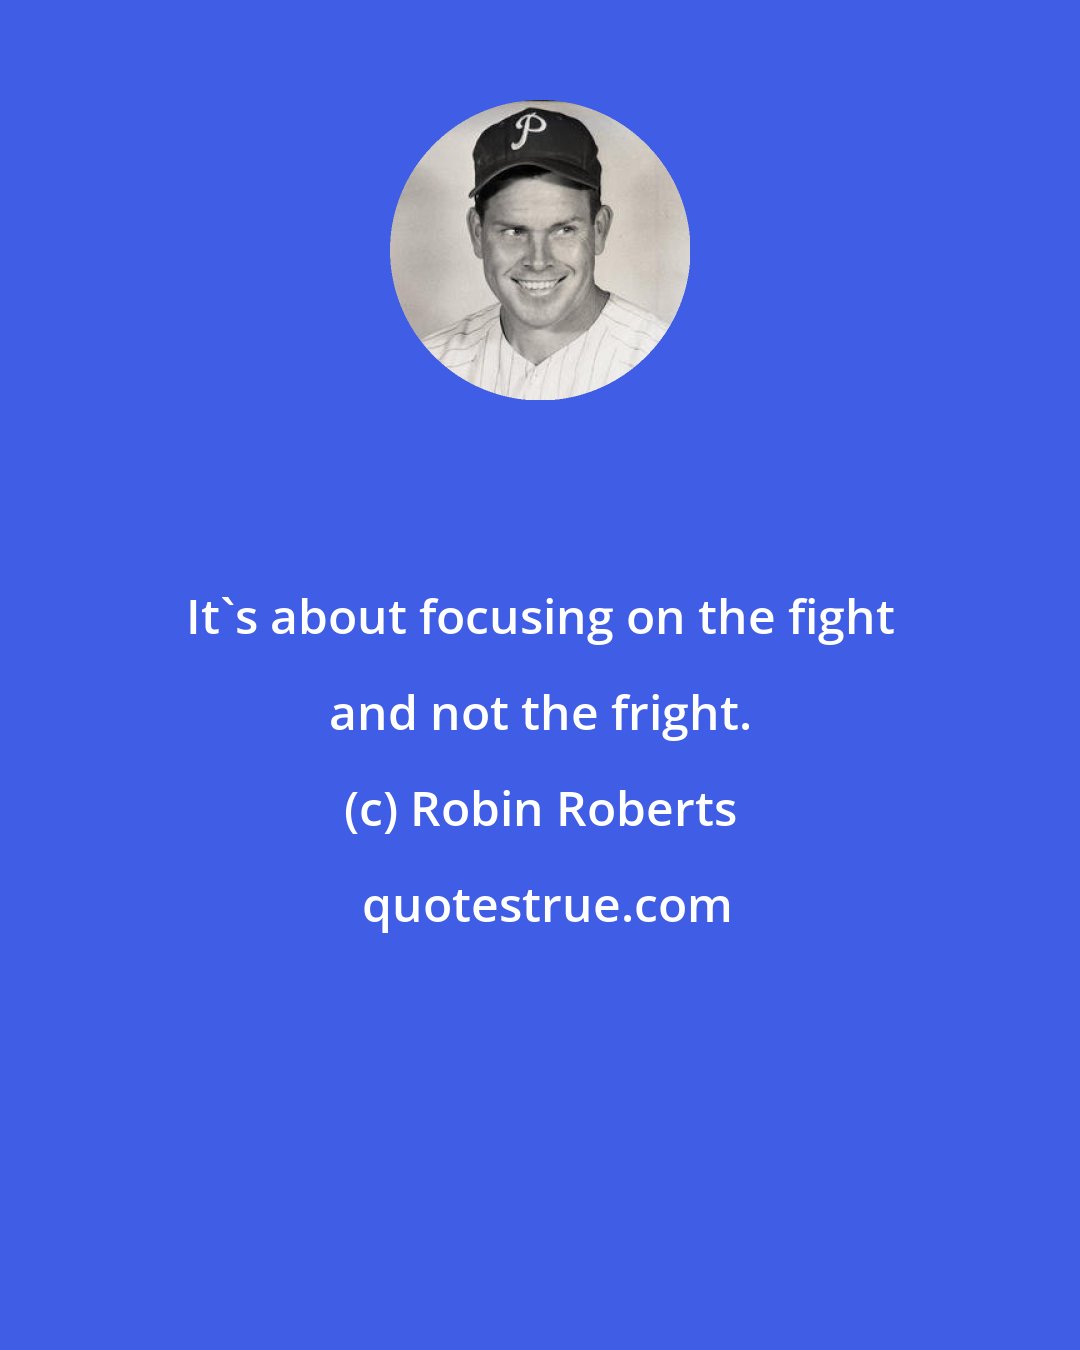 Robin Roberts: It's about focusing on the fight and not the fright.